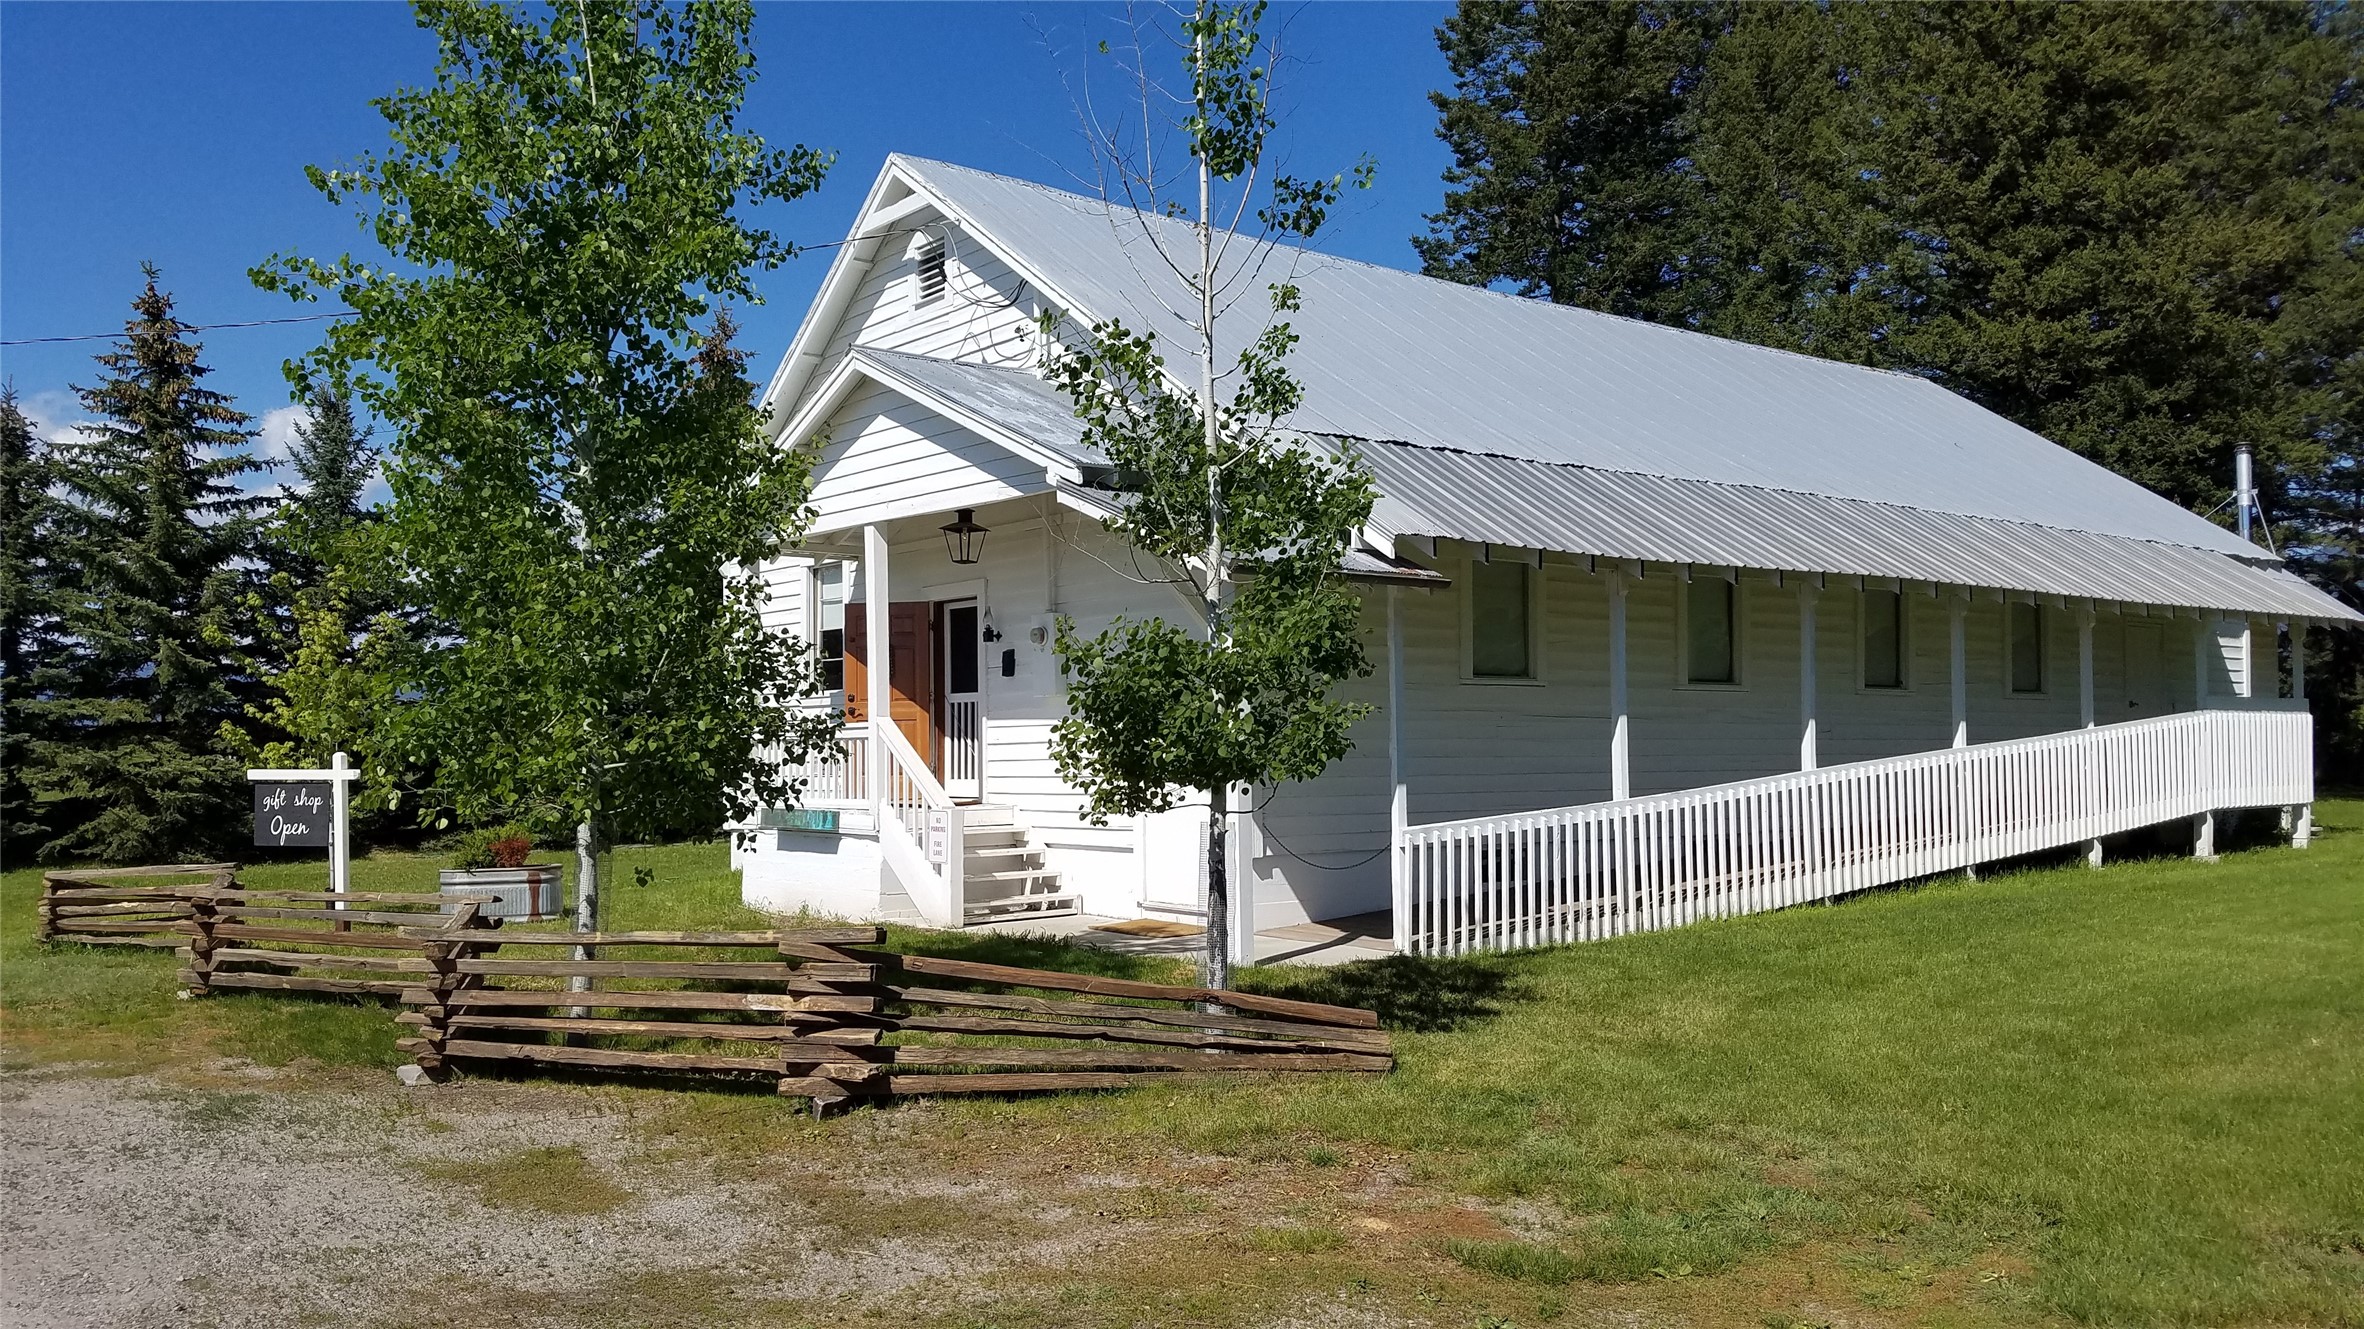 Superb commercial location 2 miles from Glacier Intl Apt, this 1 acre tract
has approx. 15K in daily traffic count and 160 ft of Hwy 2 frontage. Originally the LaSalle Grange Hall, the structure is beautifully renovated in keeping with vintage 1940s theme. At 4,527 sq ft (2684 up, 1843 down) and most recently an intimate concert hall and dinner theater venue, the building would also be ideal for uses such as retail, bakery, coffee house, restaurant, antiques - use your imagination! Trees dot the property and offer shade for parking, outdoor venue, and room for additional structures. The upper level with mountain views includes a Stage & Backstage along with handicap accessible Foyer, Powder Rm and Auditorium. The lower level is bright and cheery with surrounding windows, a vintage Kitchen, Parlor w/ Restrooms, Main Room and Bonus Room. Connected to MT Digital Fiber Optic for internet. Call Drew Hollinger at 406-212-8837 or your real estate  professional. Easy to show!